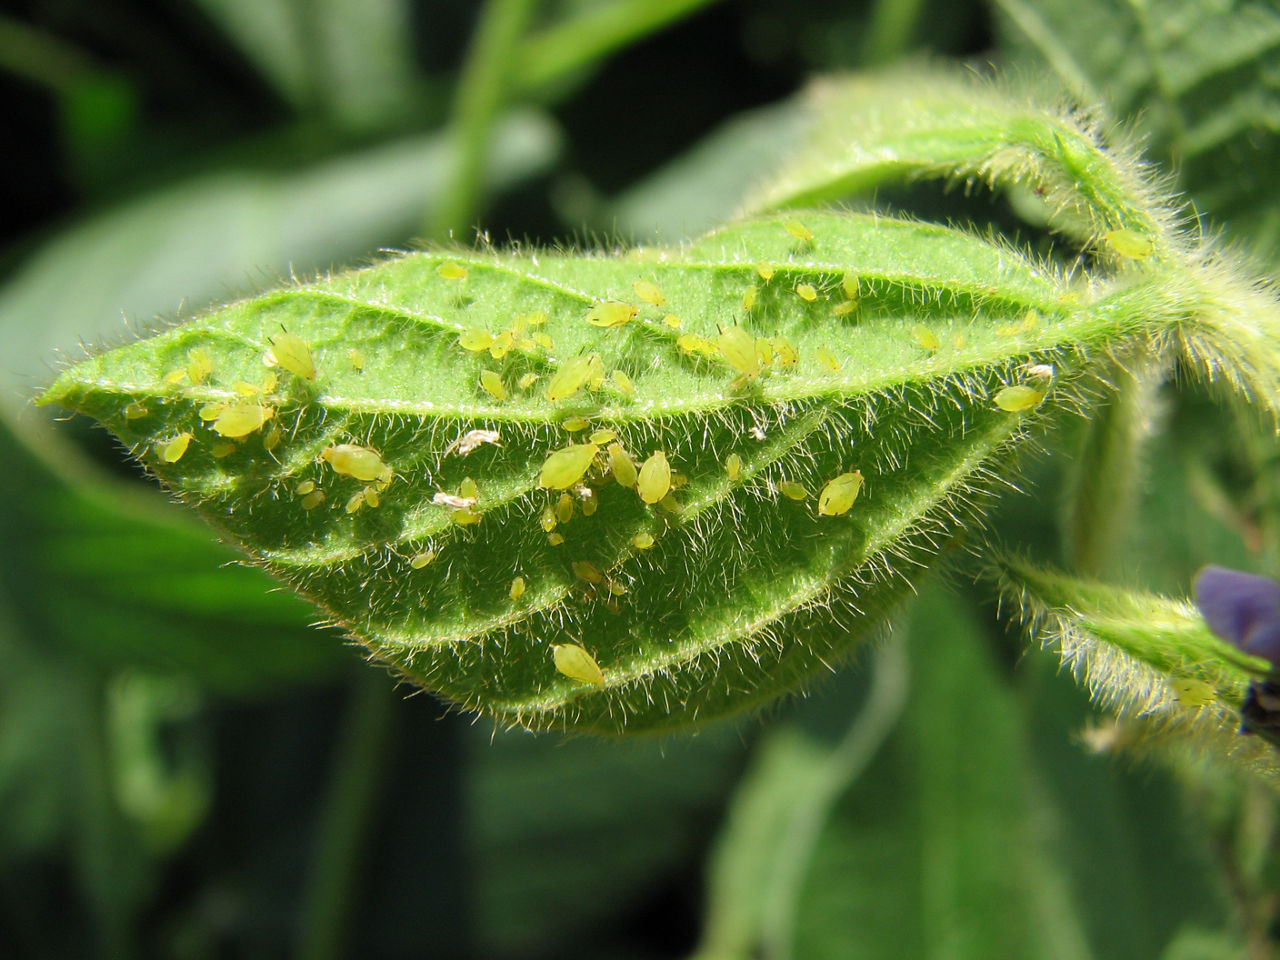 Figure 6. Soybean aphids on the underside of the leaf.